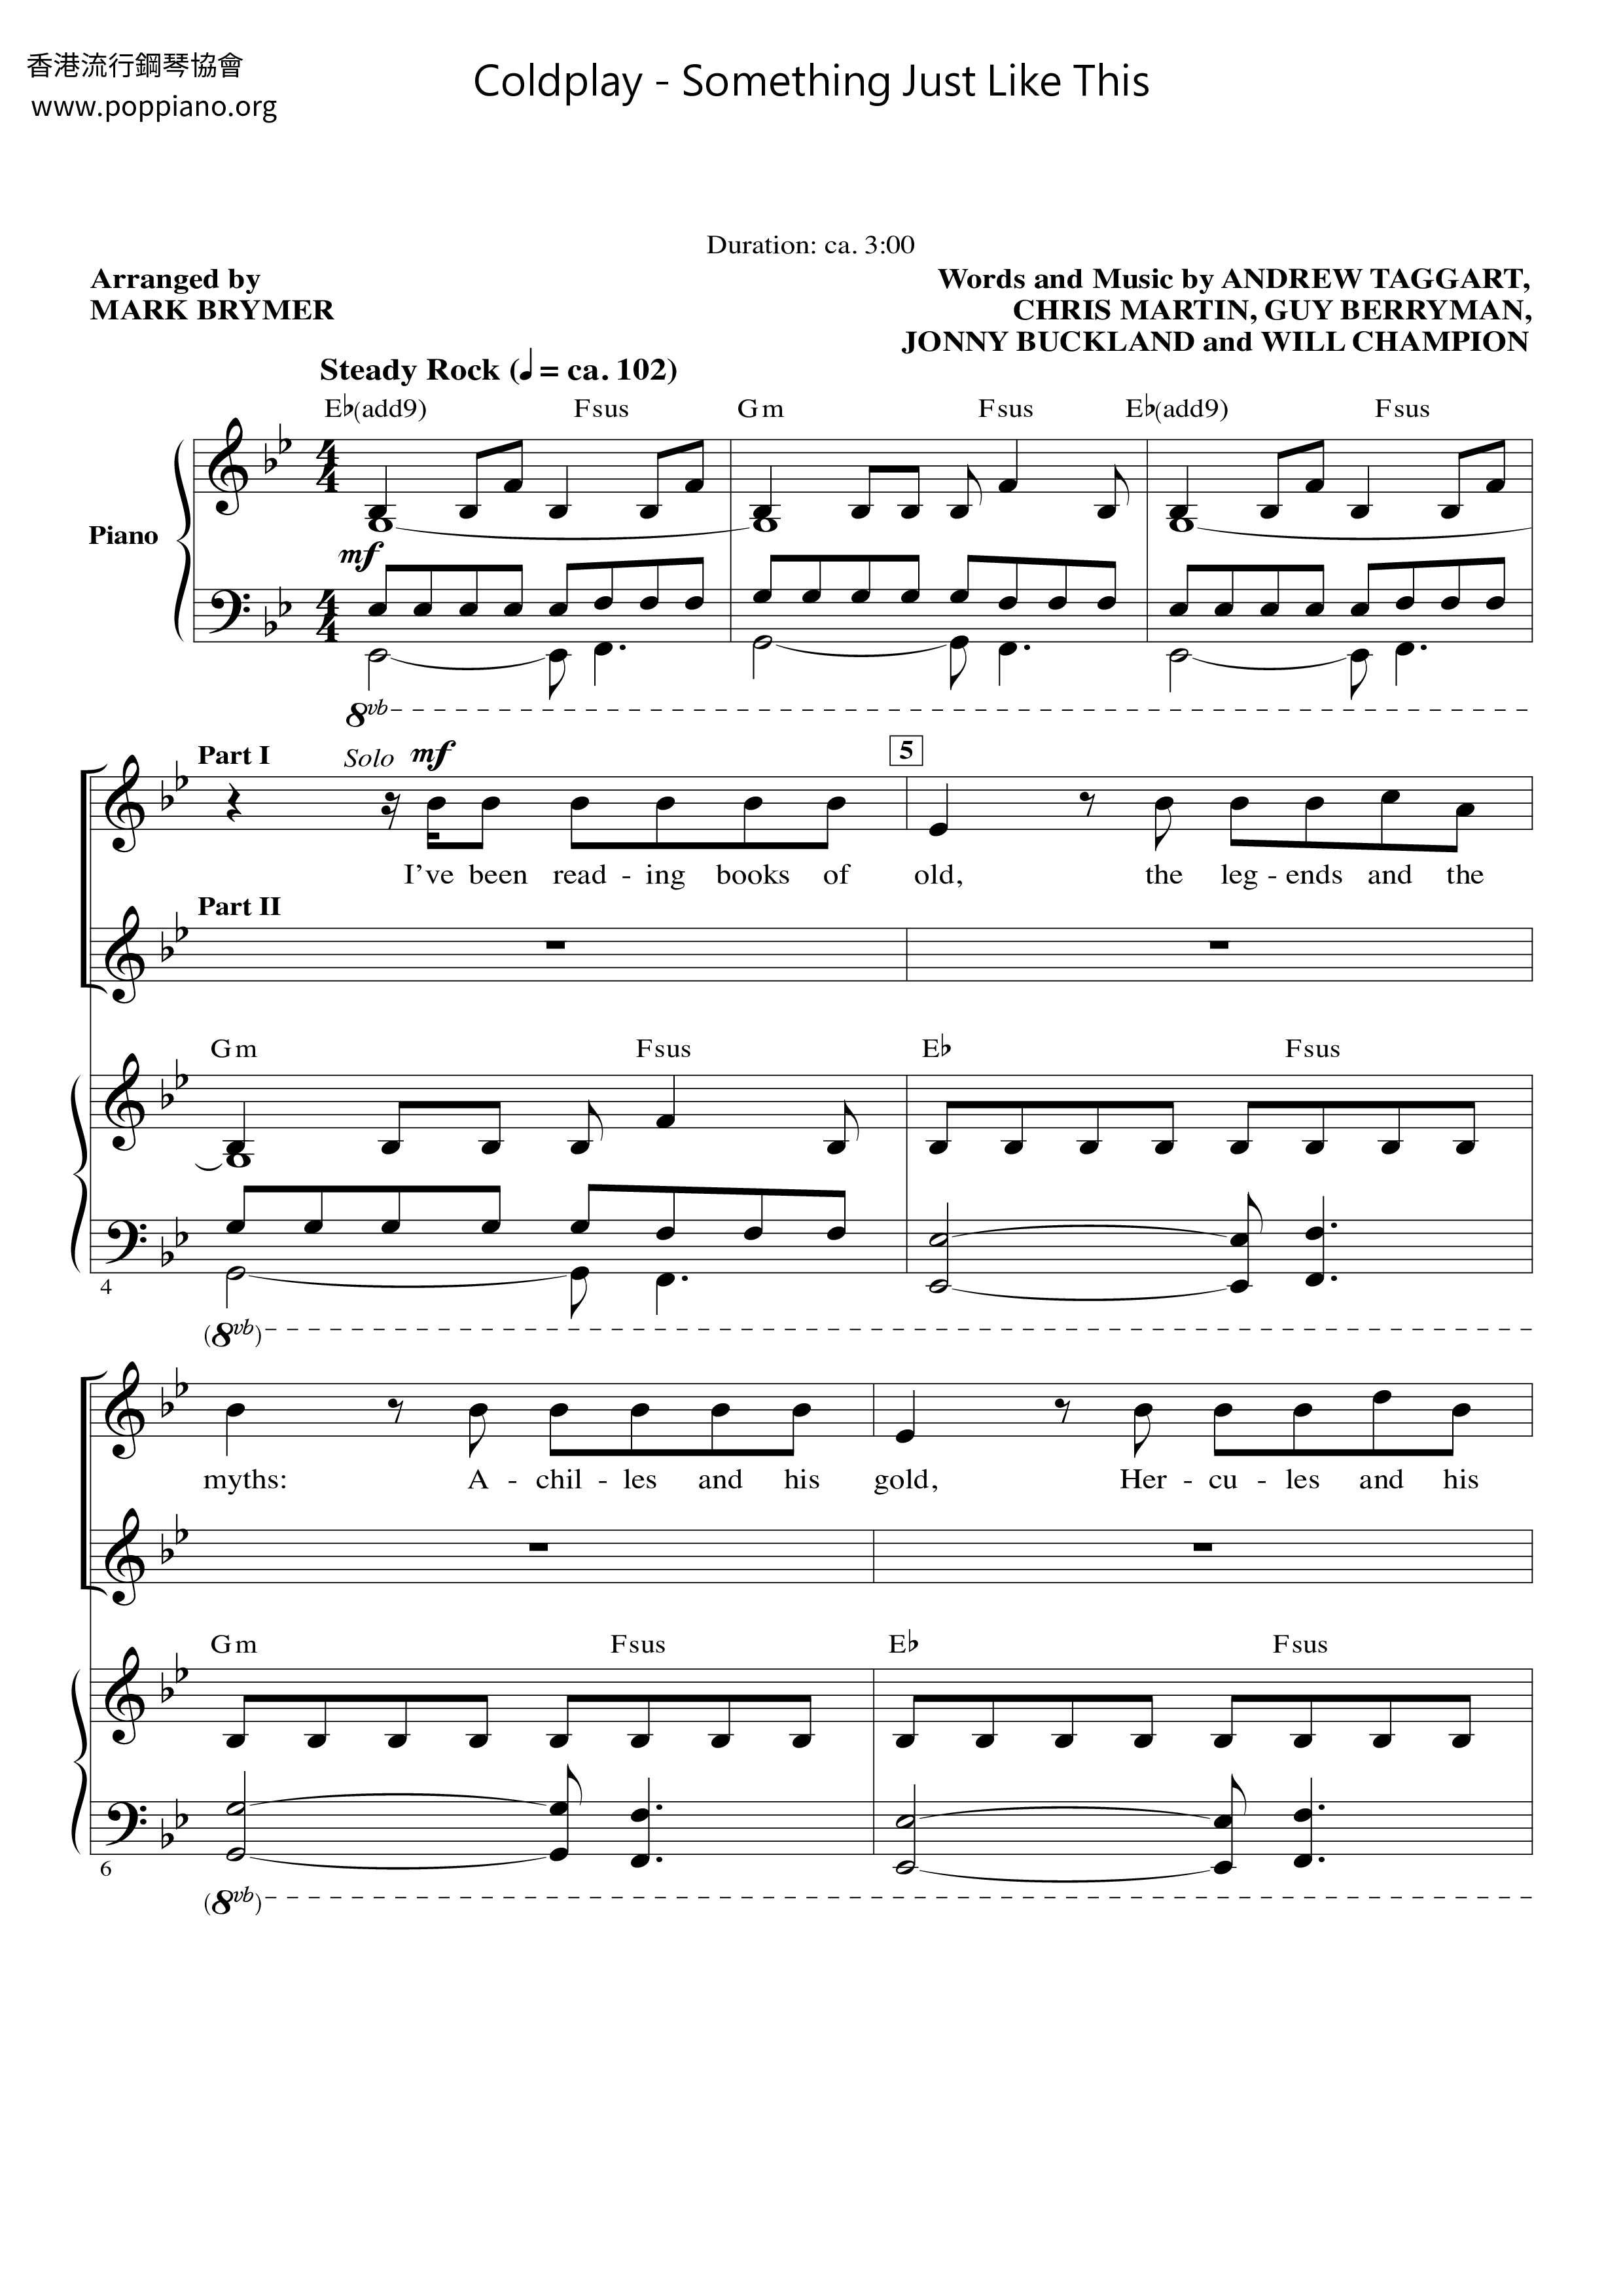 Coldplay The Chainsmokers Something Just Like This Sheet Music Pdf Free Score Download